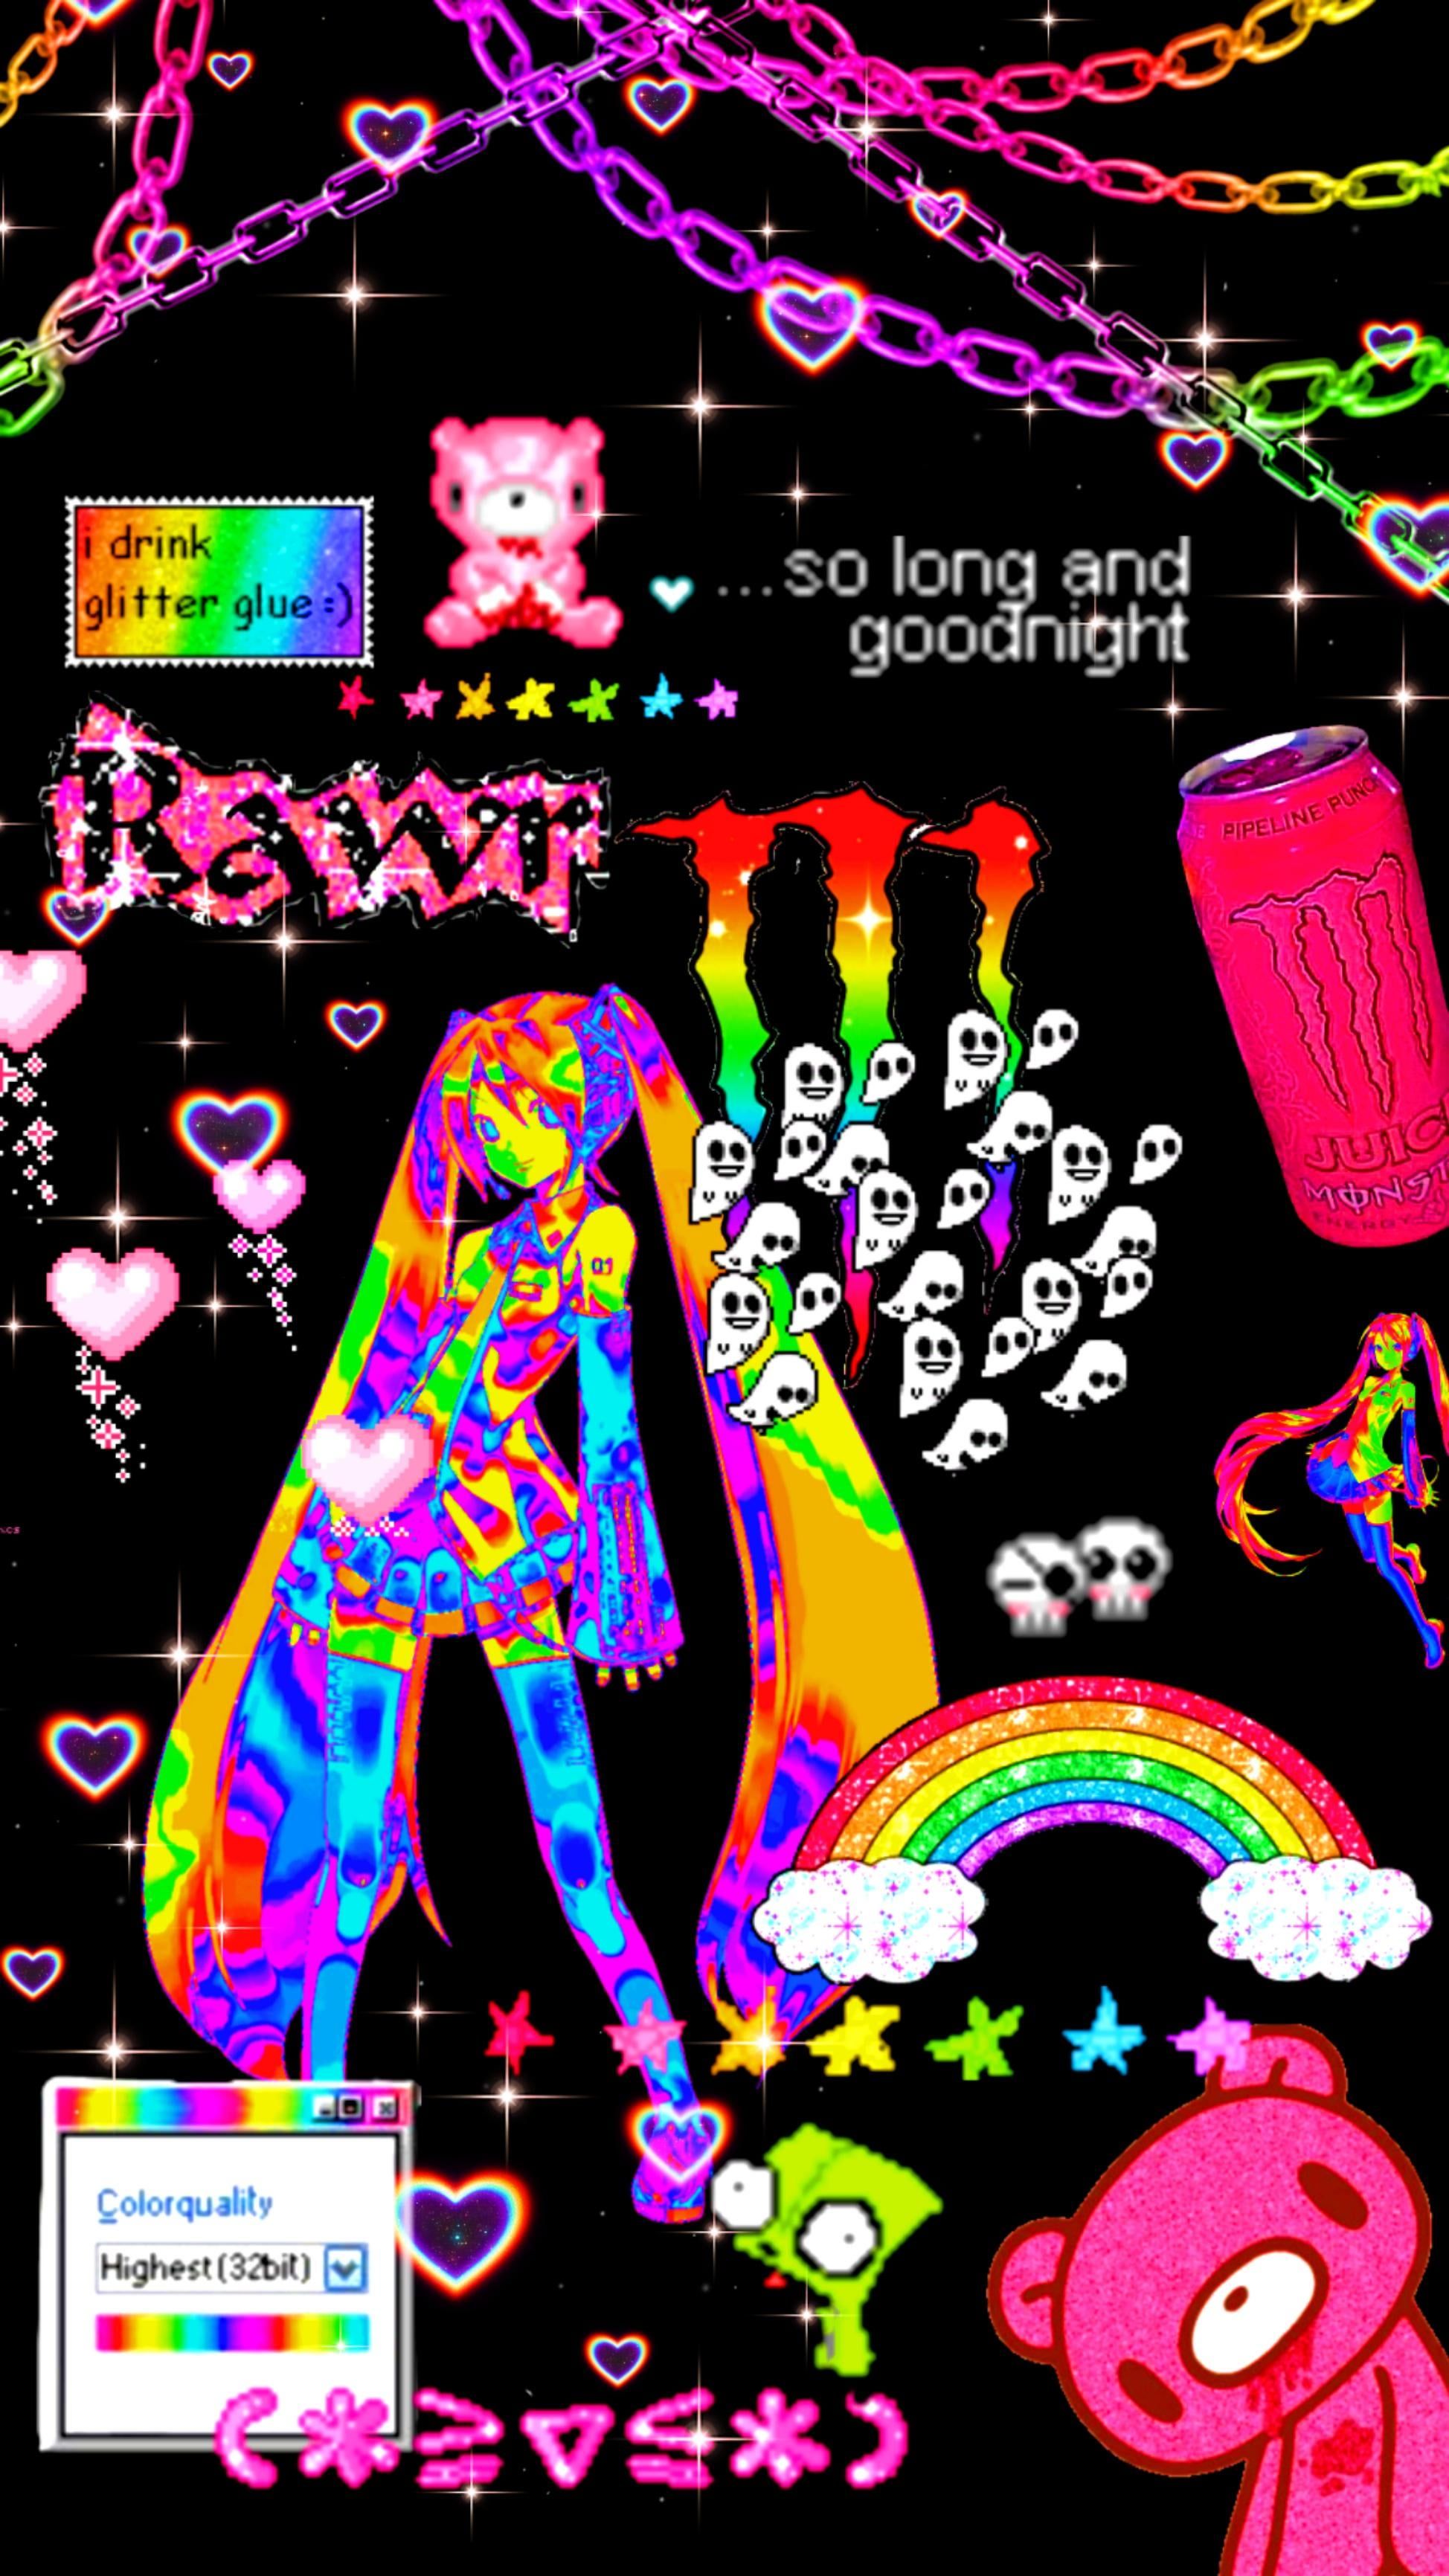 Aesthetic wallpaper with a neon girl, skulls, chains, and a rainbow. - Scenecore